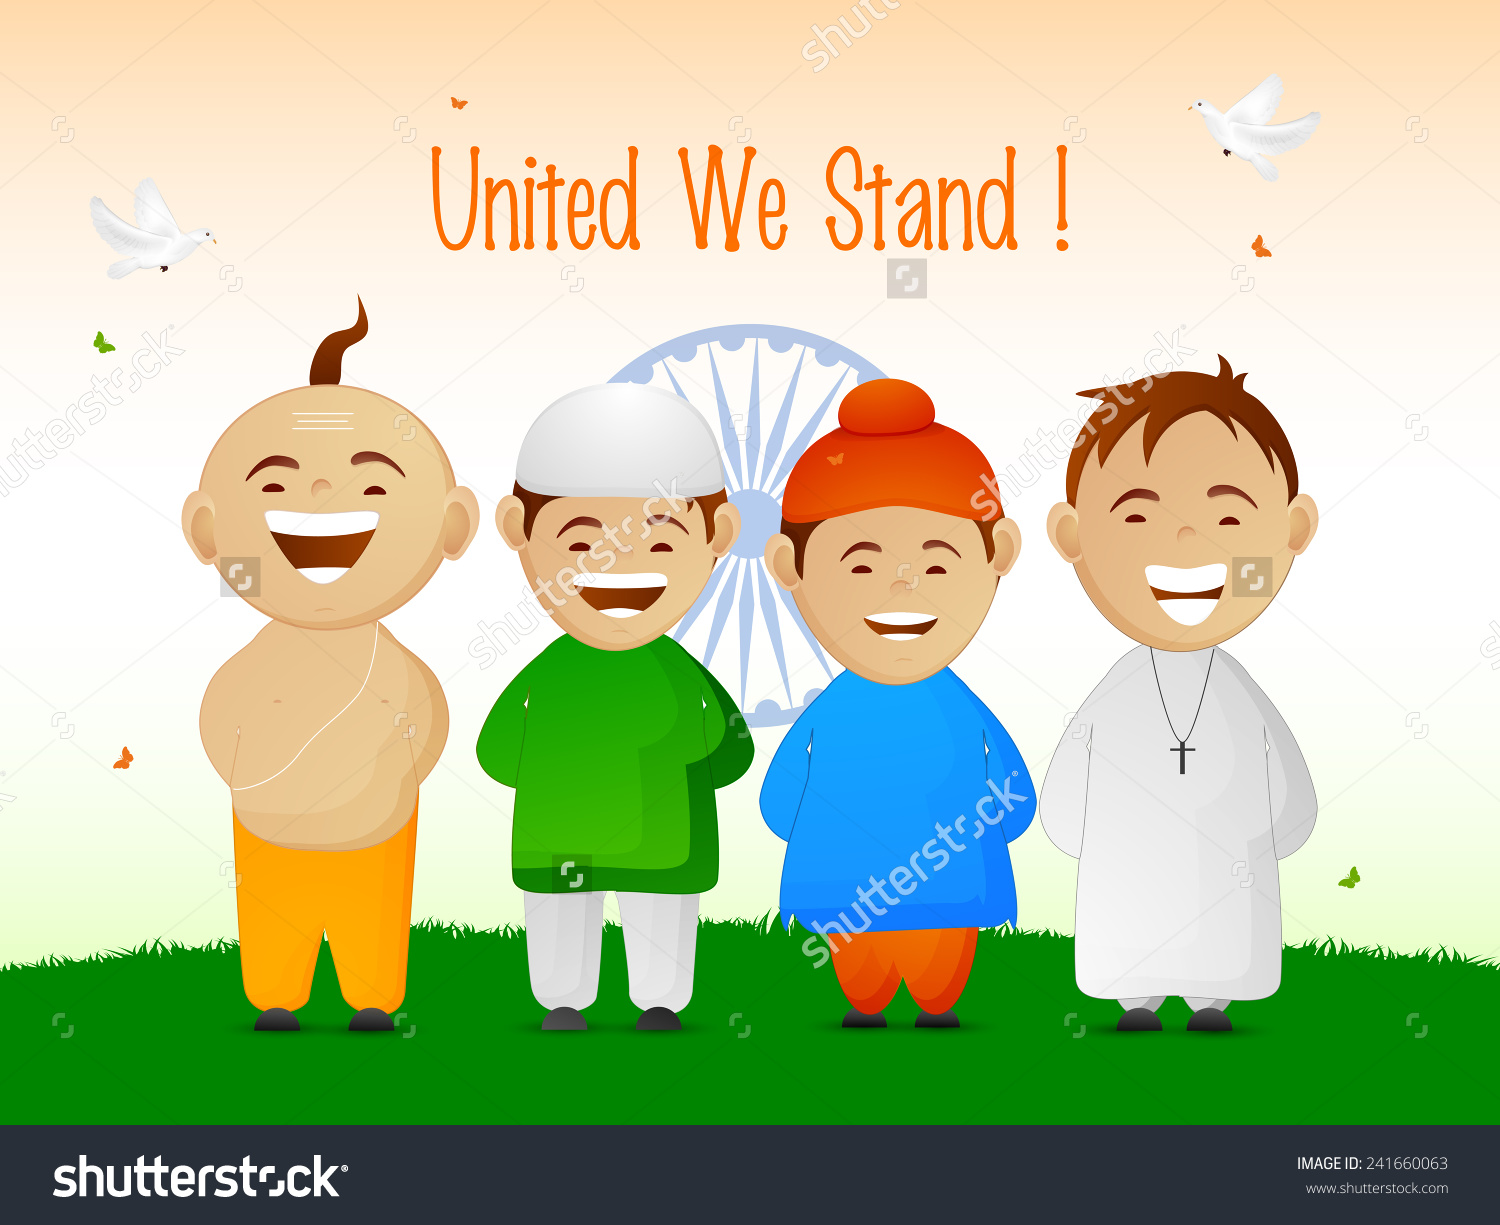 India Cute Little Kids Different Religion Stock Vector 241660063.